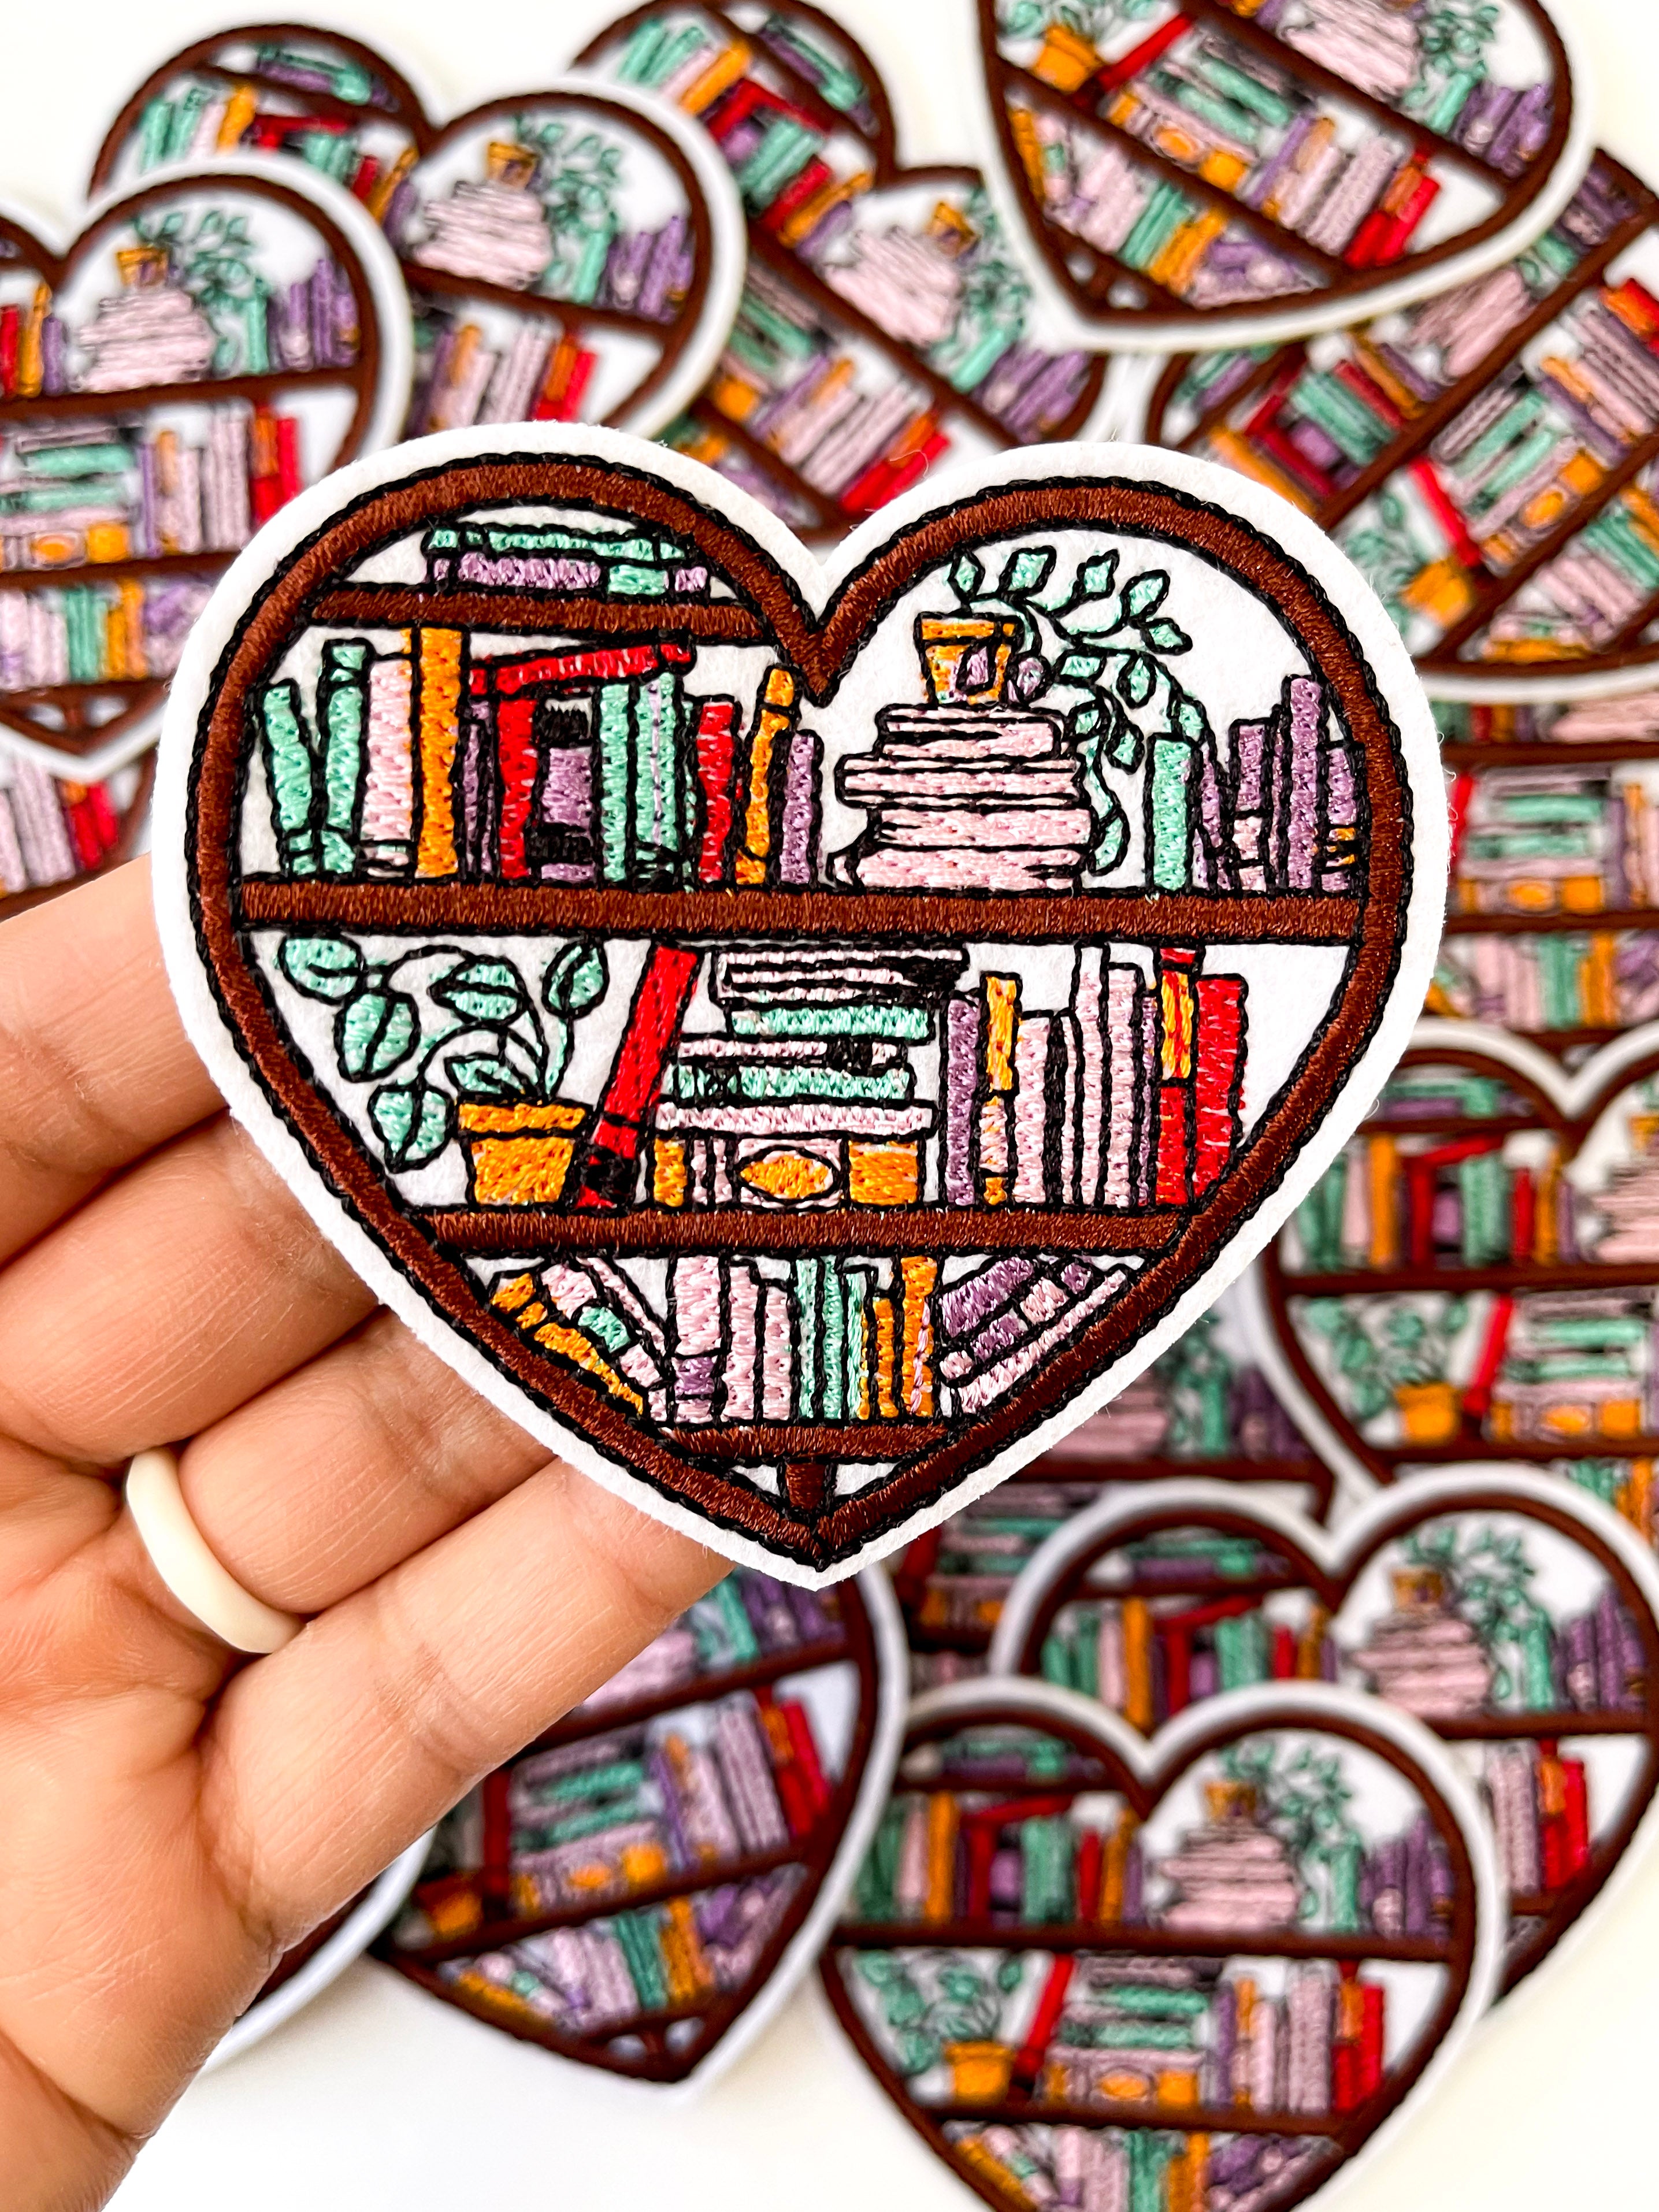 Bookish bookshelf heart iron on patch, front view, colorful book lover gift